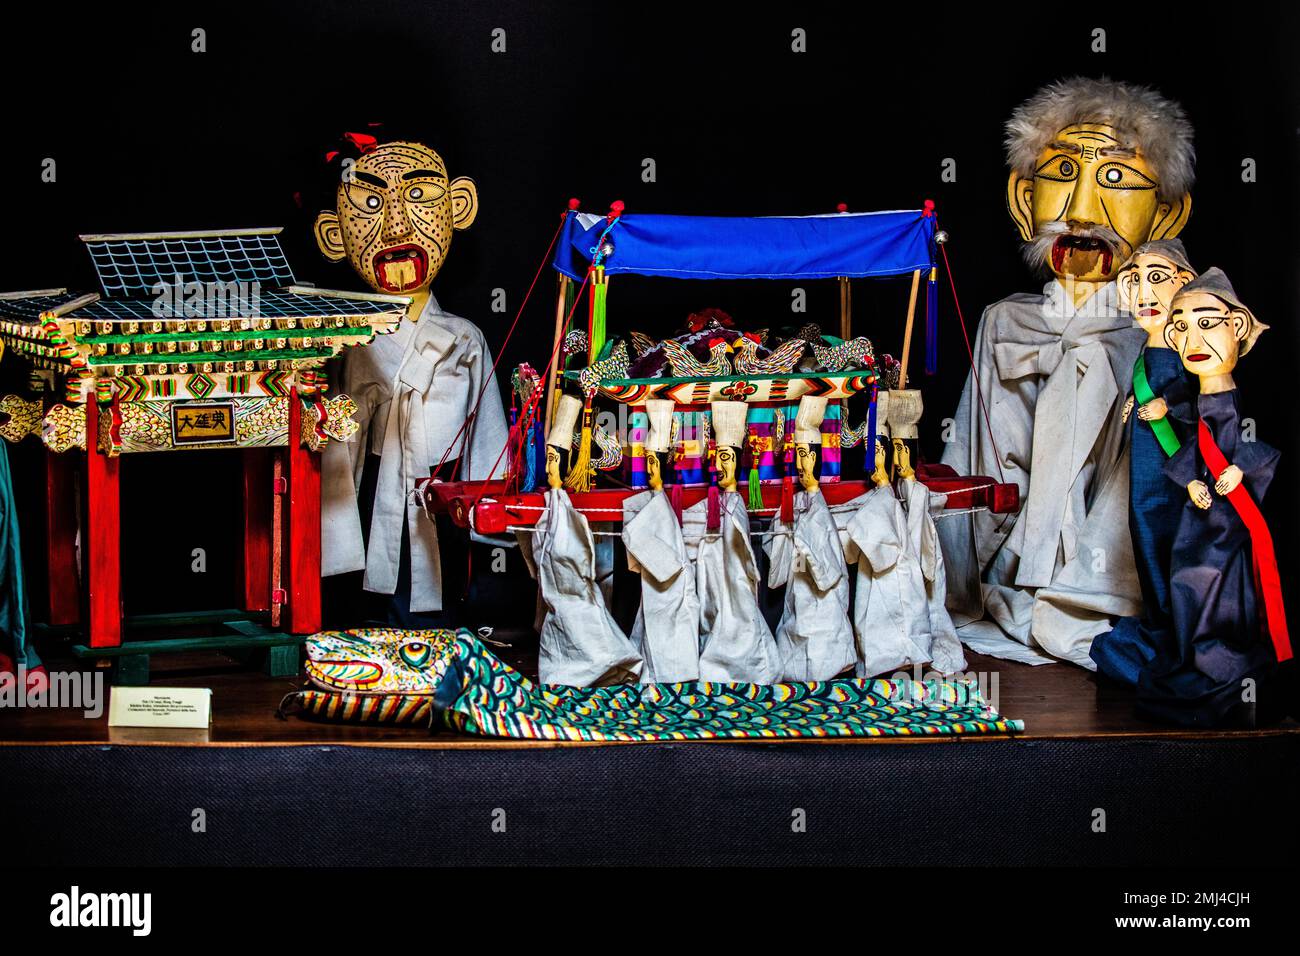 Puppet from Korea, Puppet theatre, Museo internazionale delle marionette Antonio Pasqualino, Unesco Masterpiece of the Oral and Intangible Heritage Stock Photo